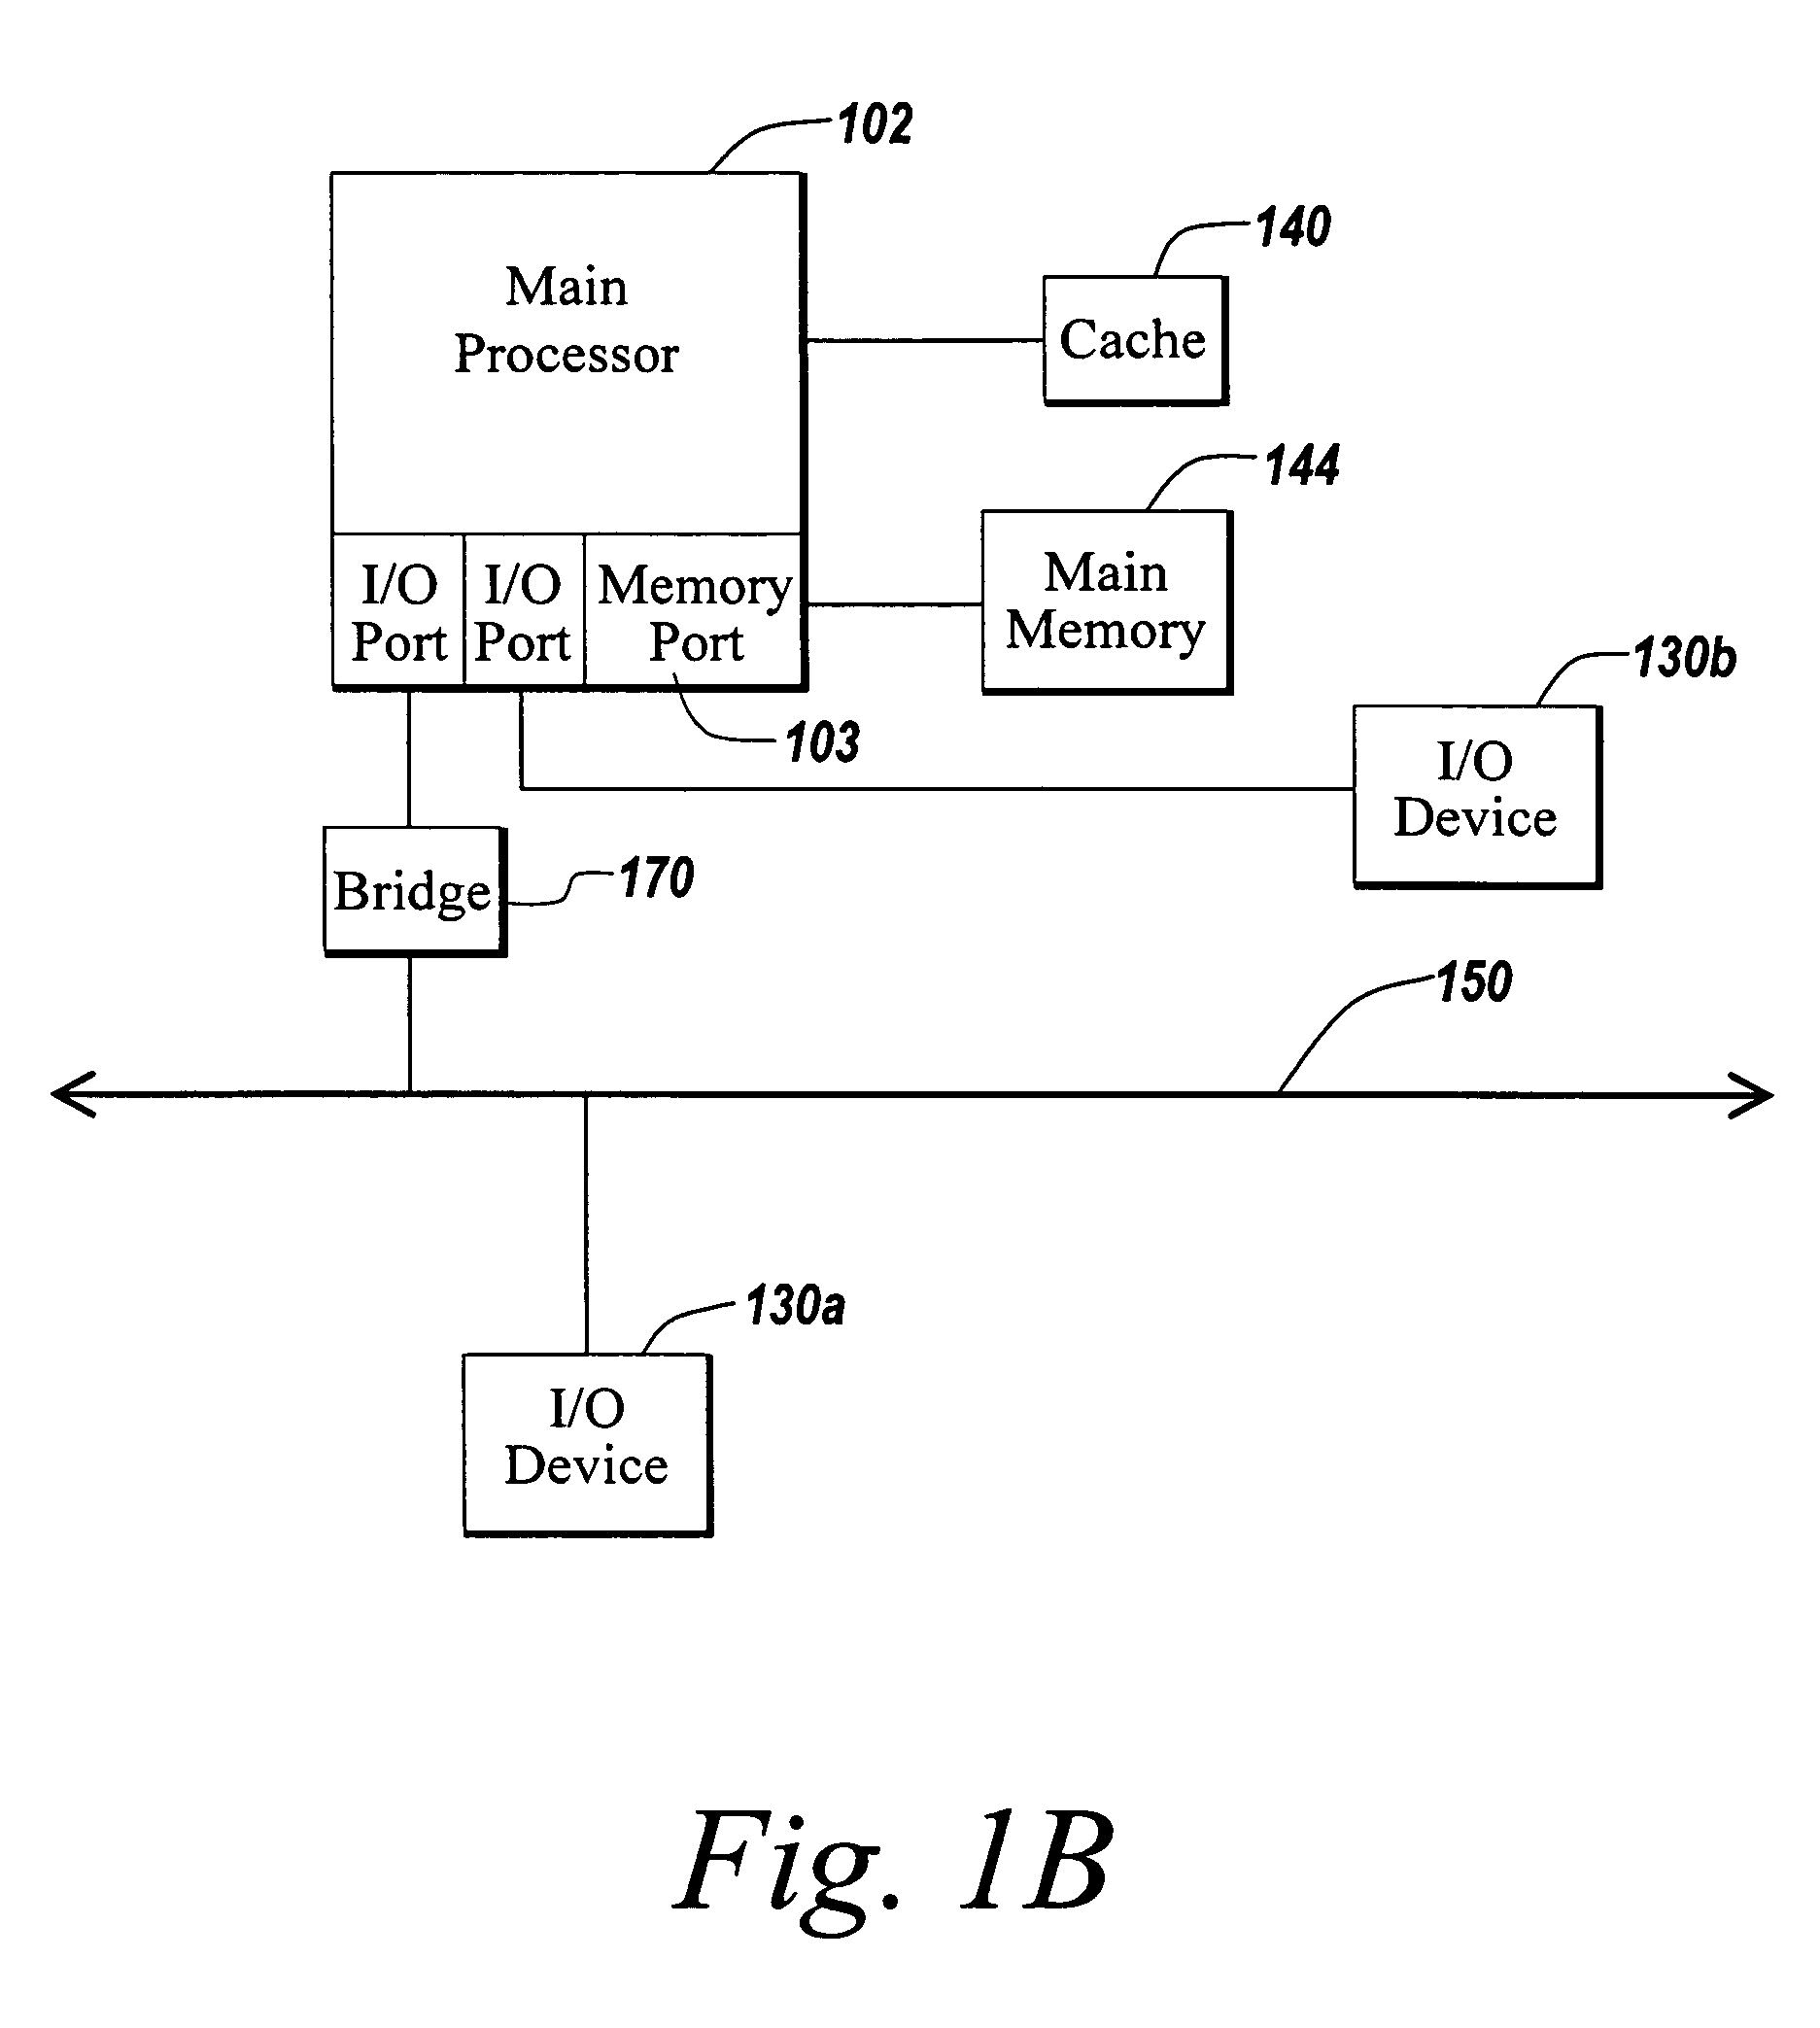 Systems and methods for providing client-side accelerated access to remote applications via TCP buffering